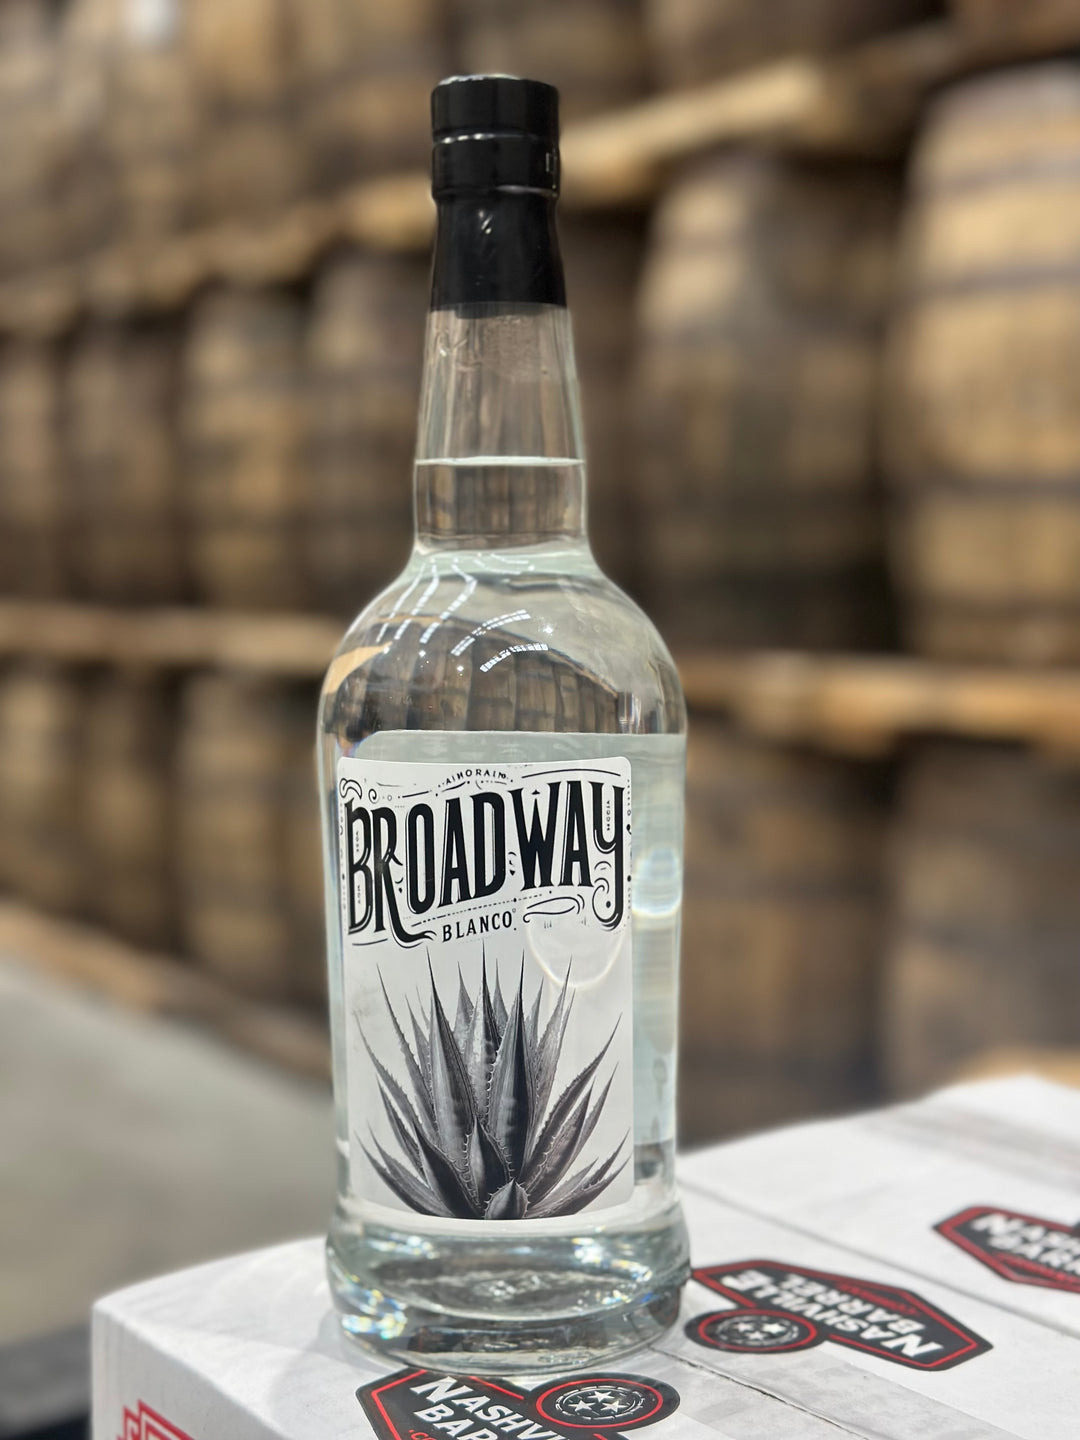 Broadway Blanco -100% Blue Weber Agave -From Tequila